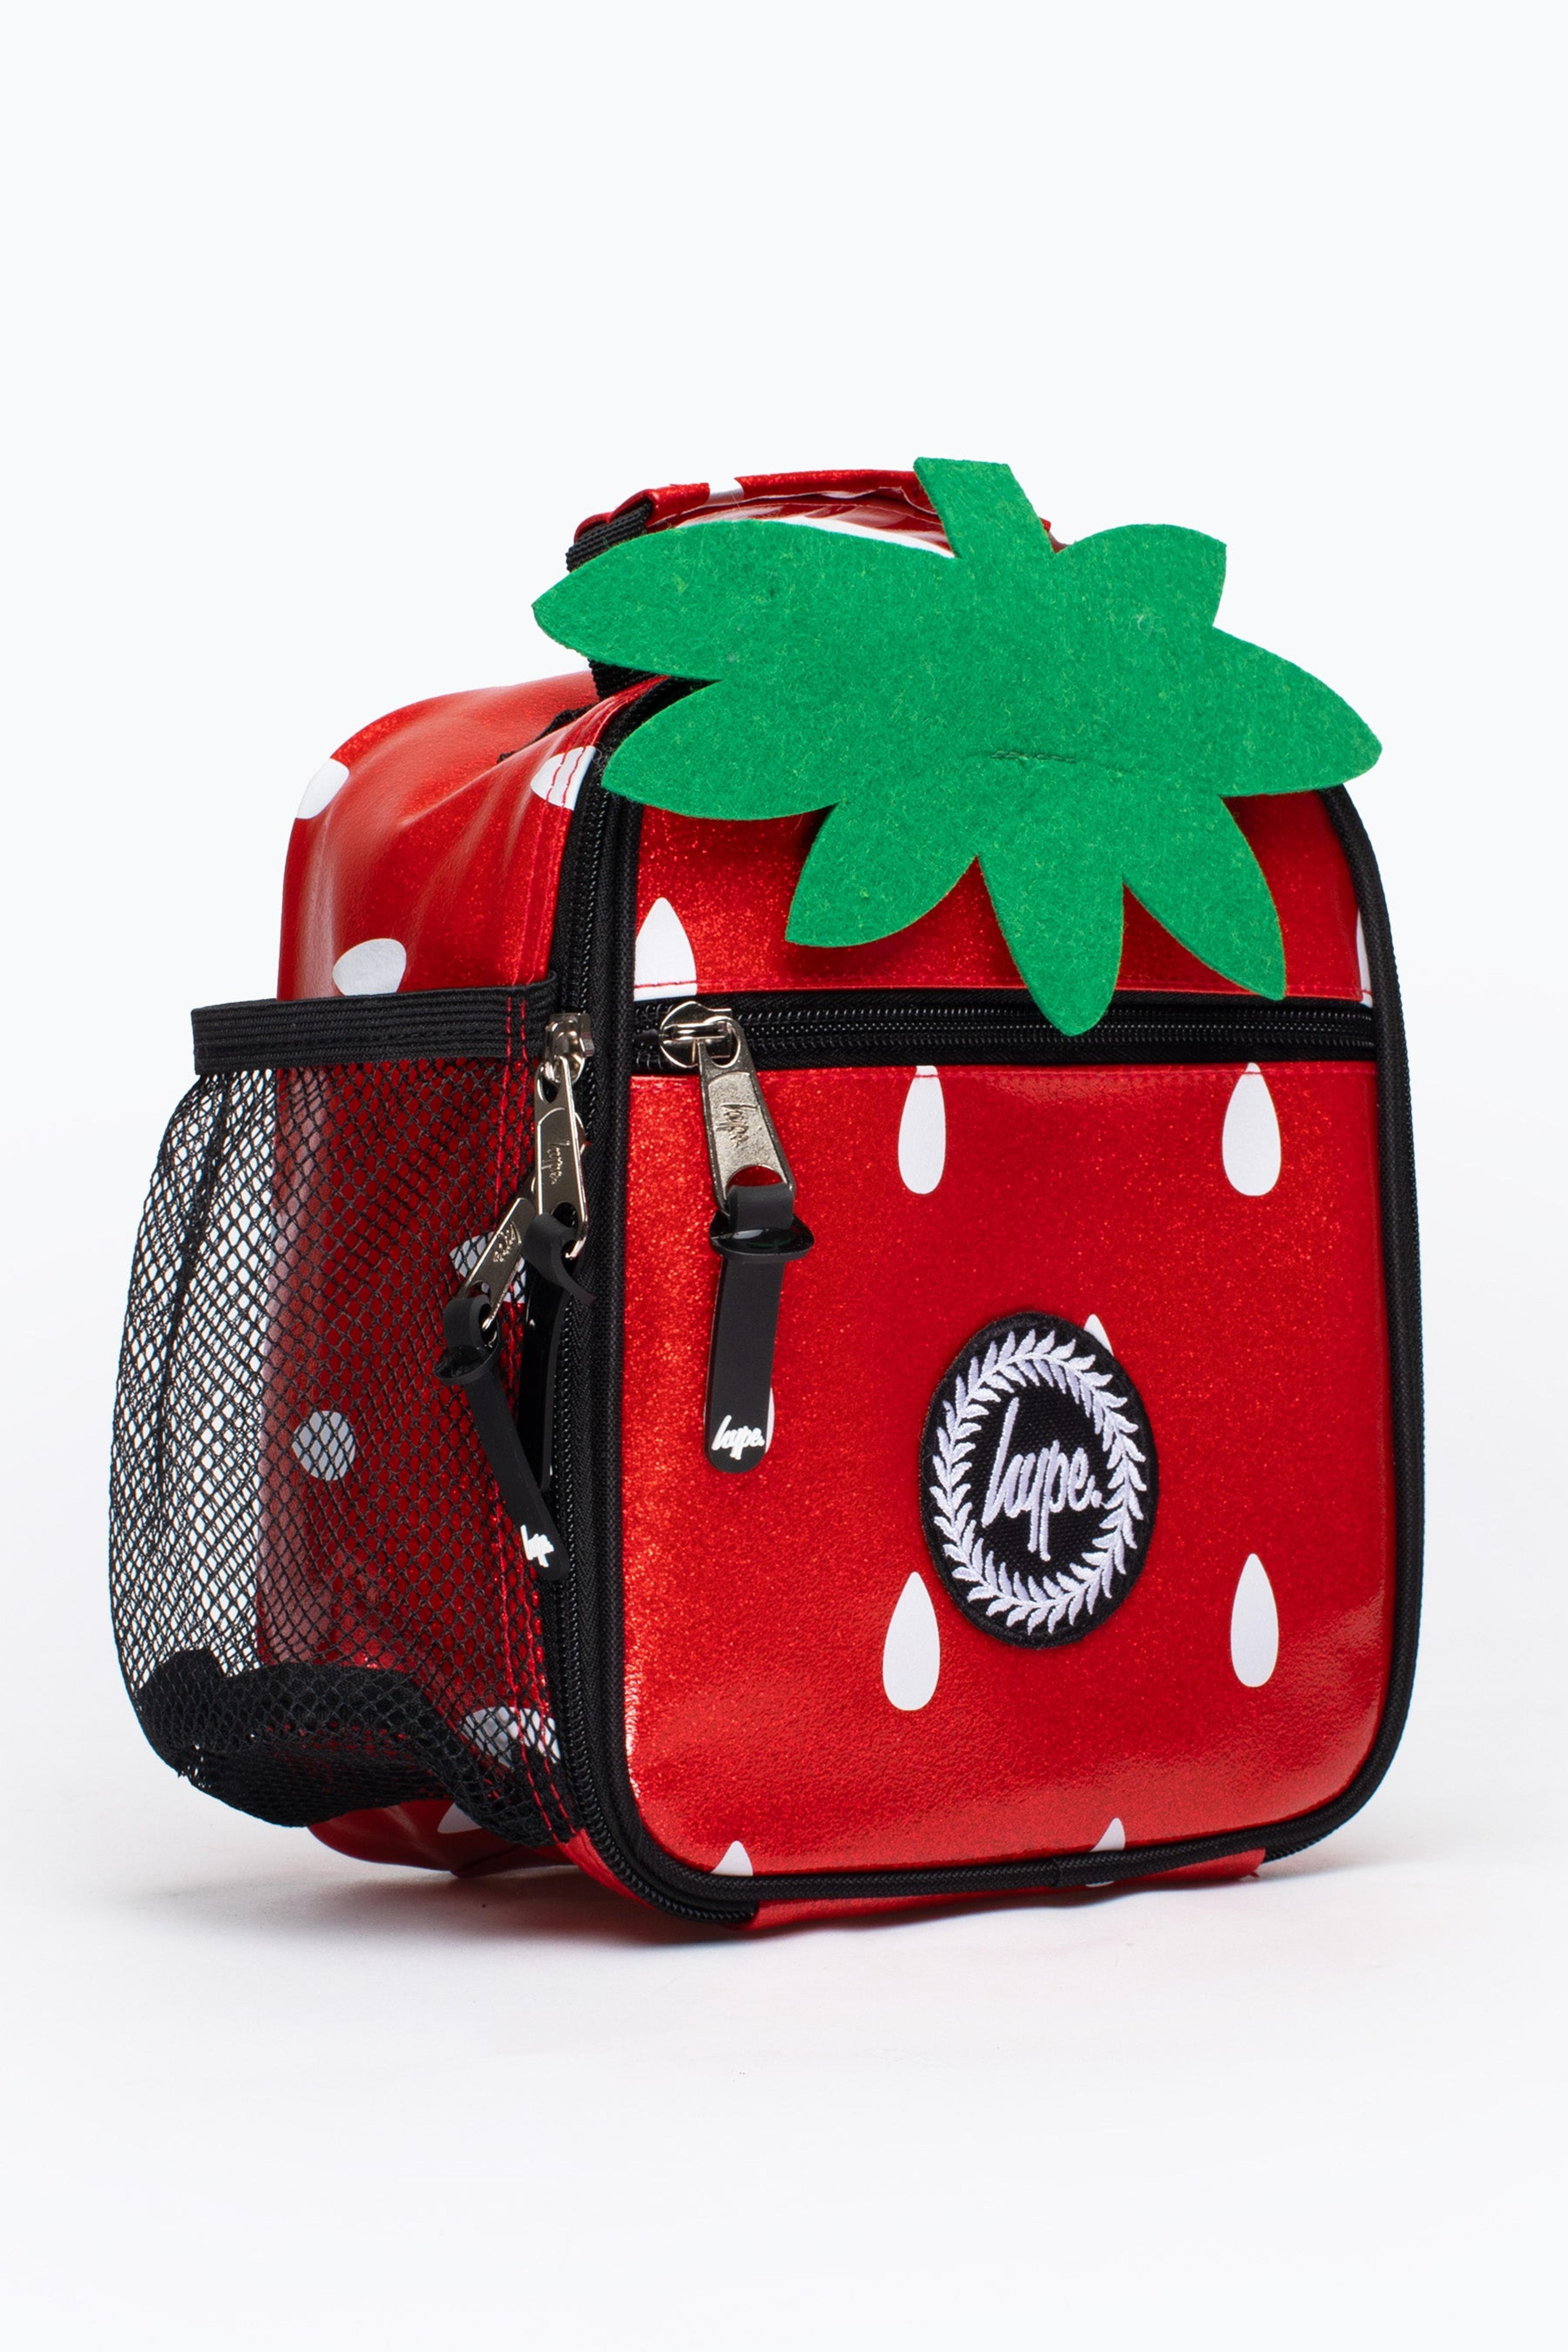 Alternate View 1 of HYPE KIDS UNISEX RED STRAWBERRY LUNCH BOX